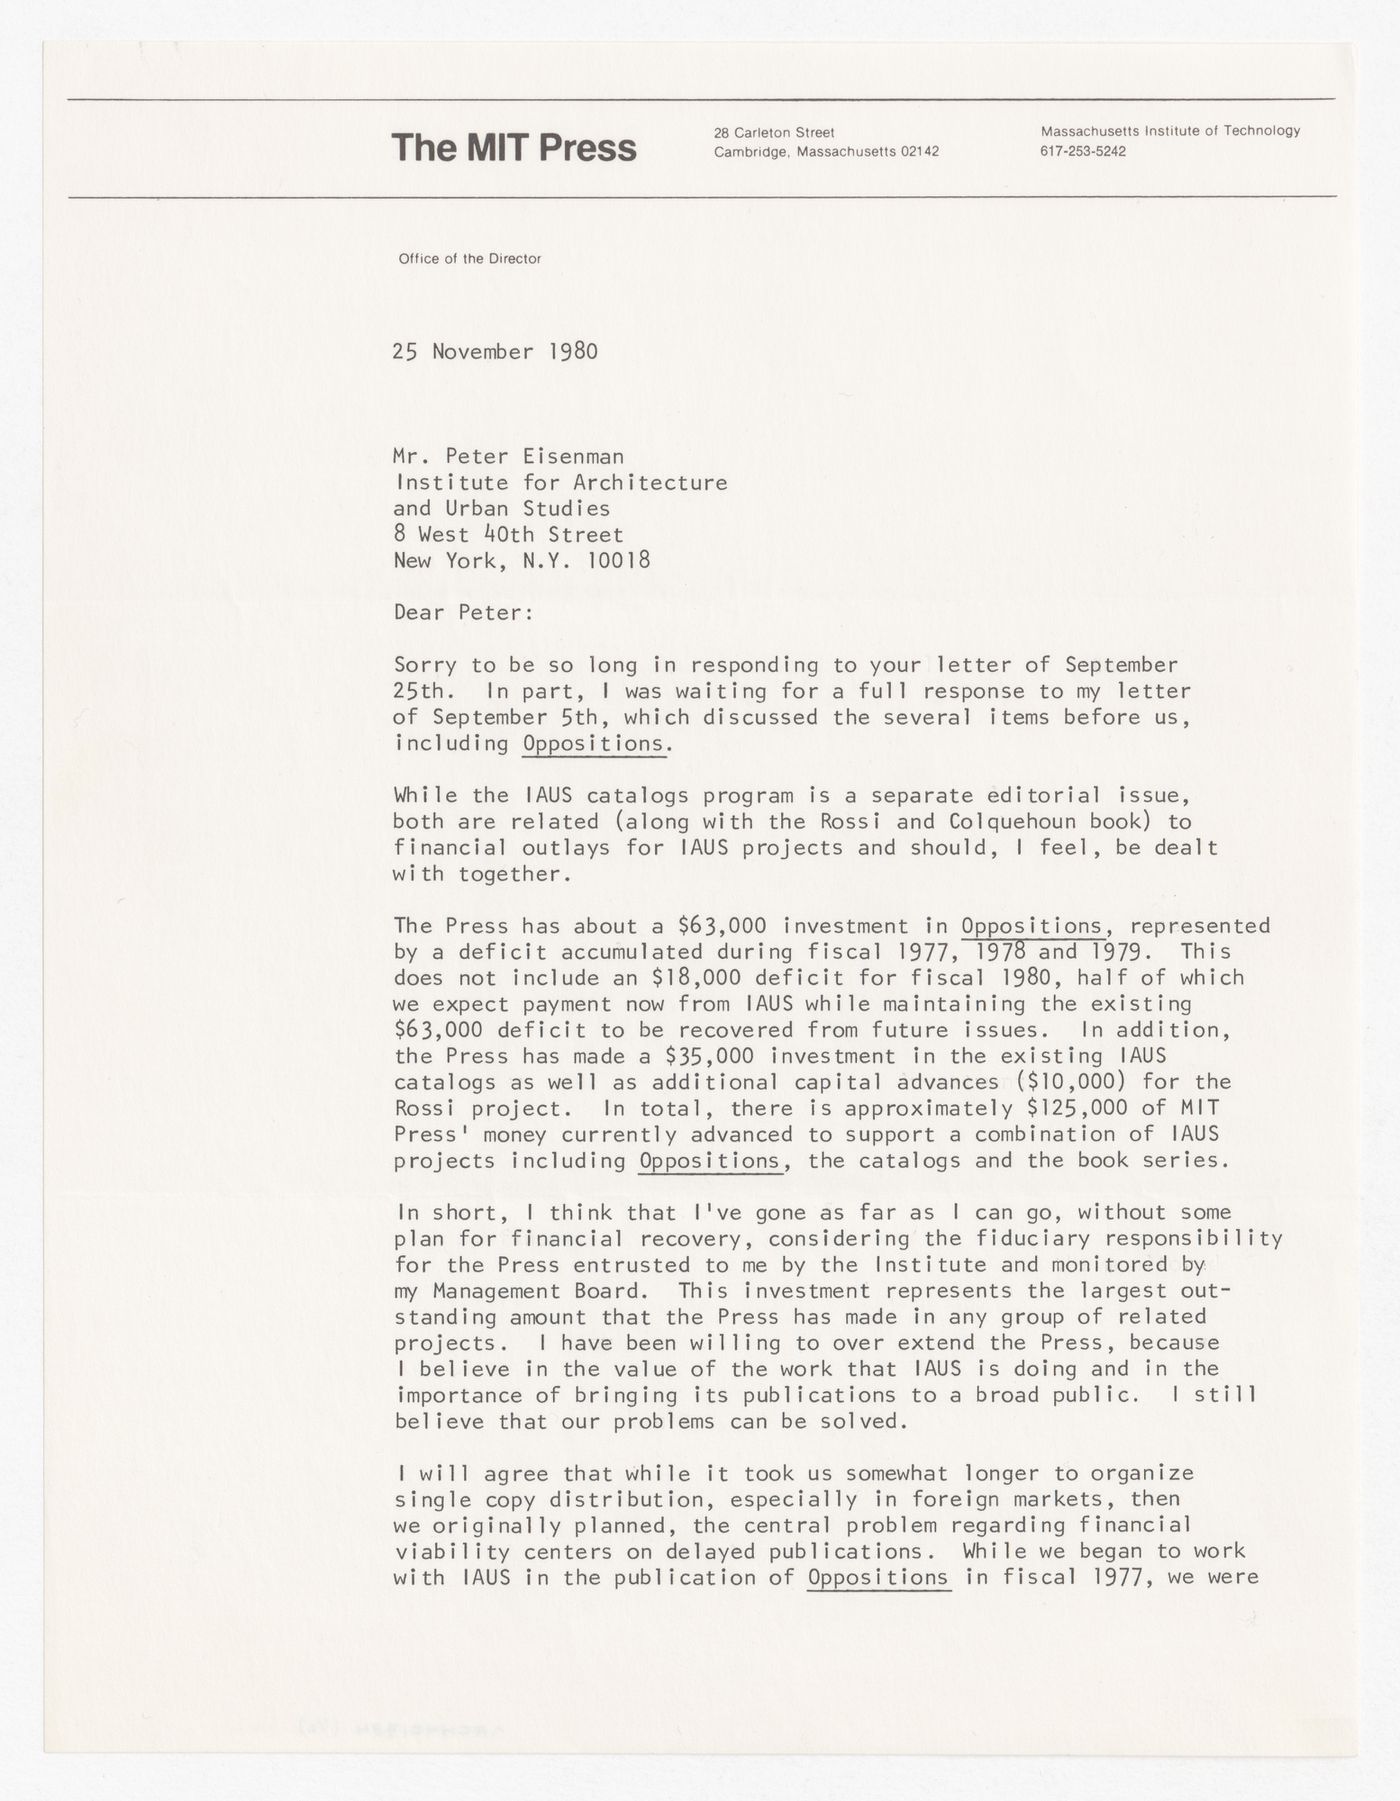 Letter from Frank Urbanowski to Peter D. Eisenman about financial status of Oppositions Journal